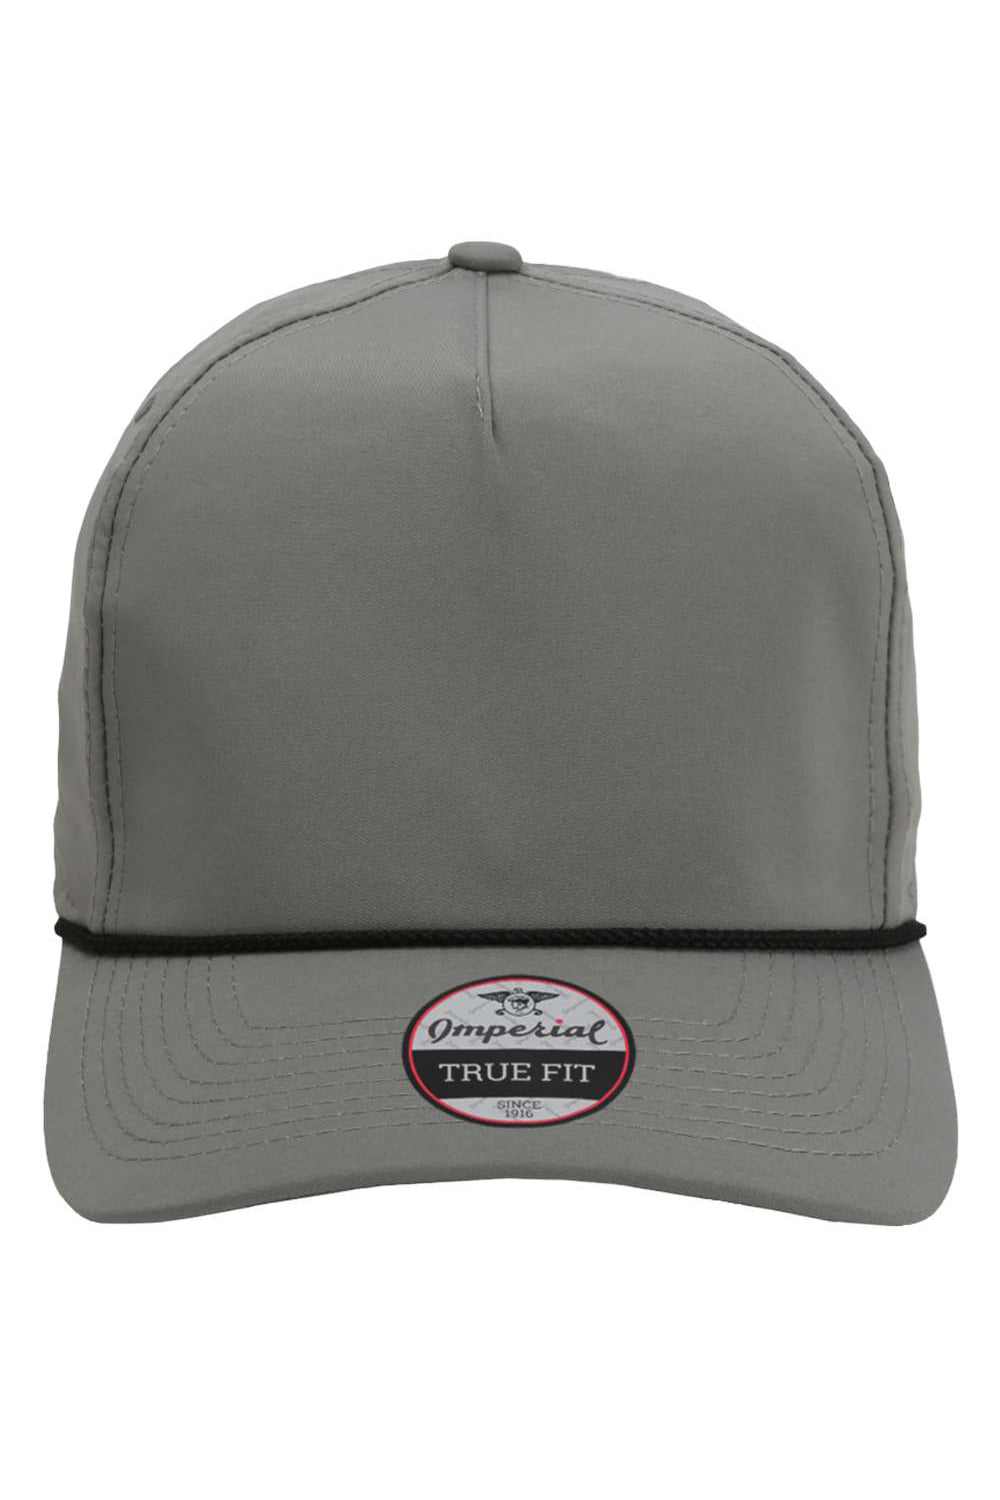 Imperial 5054 Mens The Wrightson Hat Grey/Black Flat Front